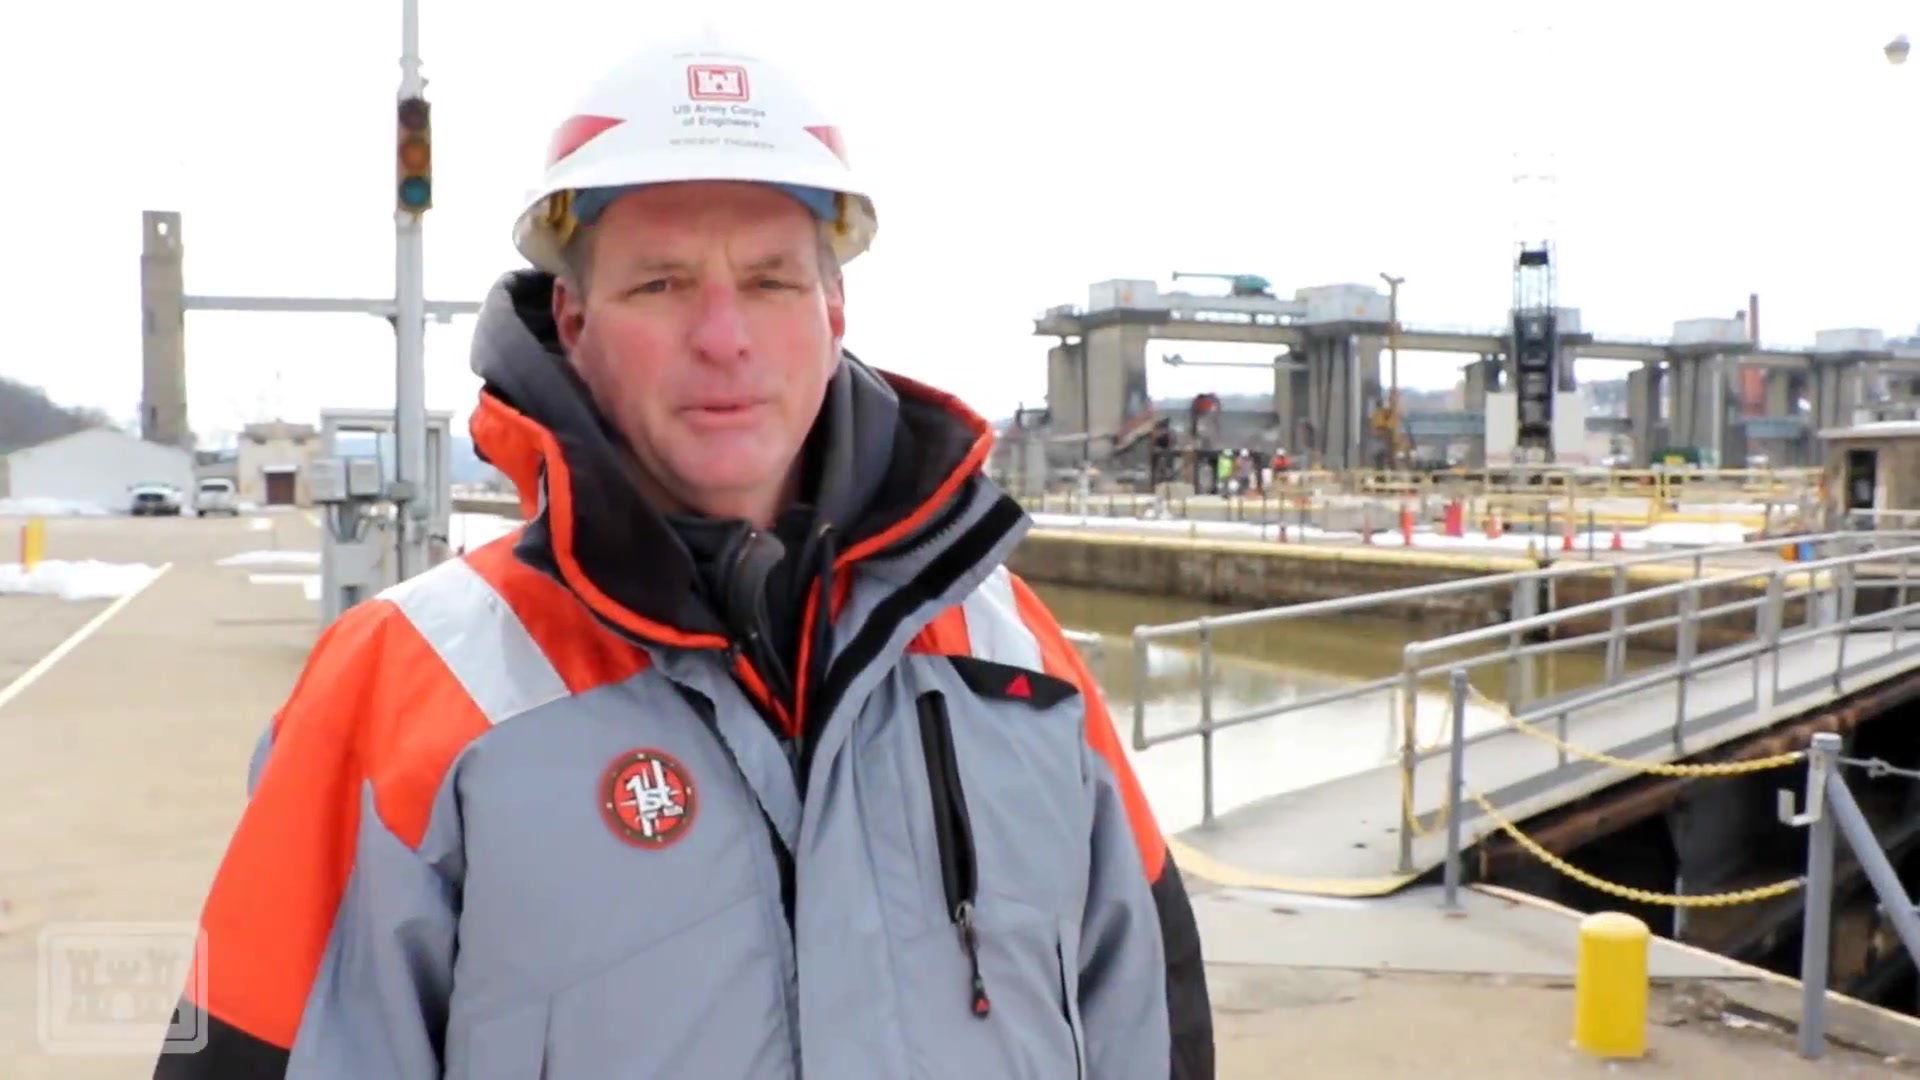 #WaterSafetyWednesday: the Lower Mon project is going along smoothly! Kirk McWilliams, resident engineer at Charleroi Locks and Dams, shares an update on Feb. 17, 2021.